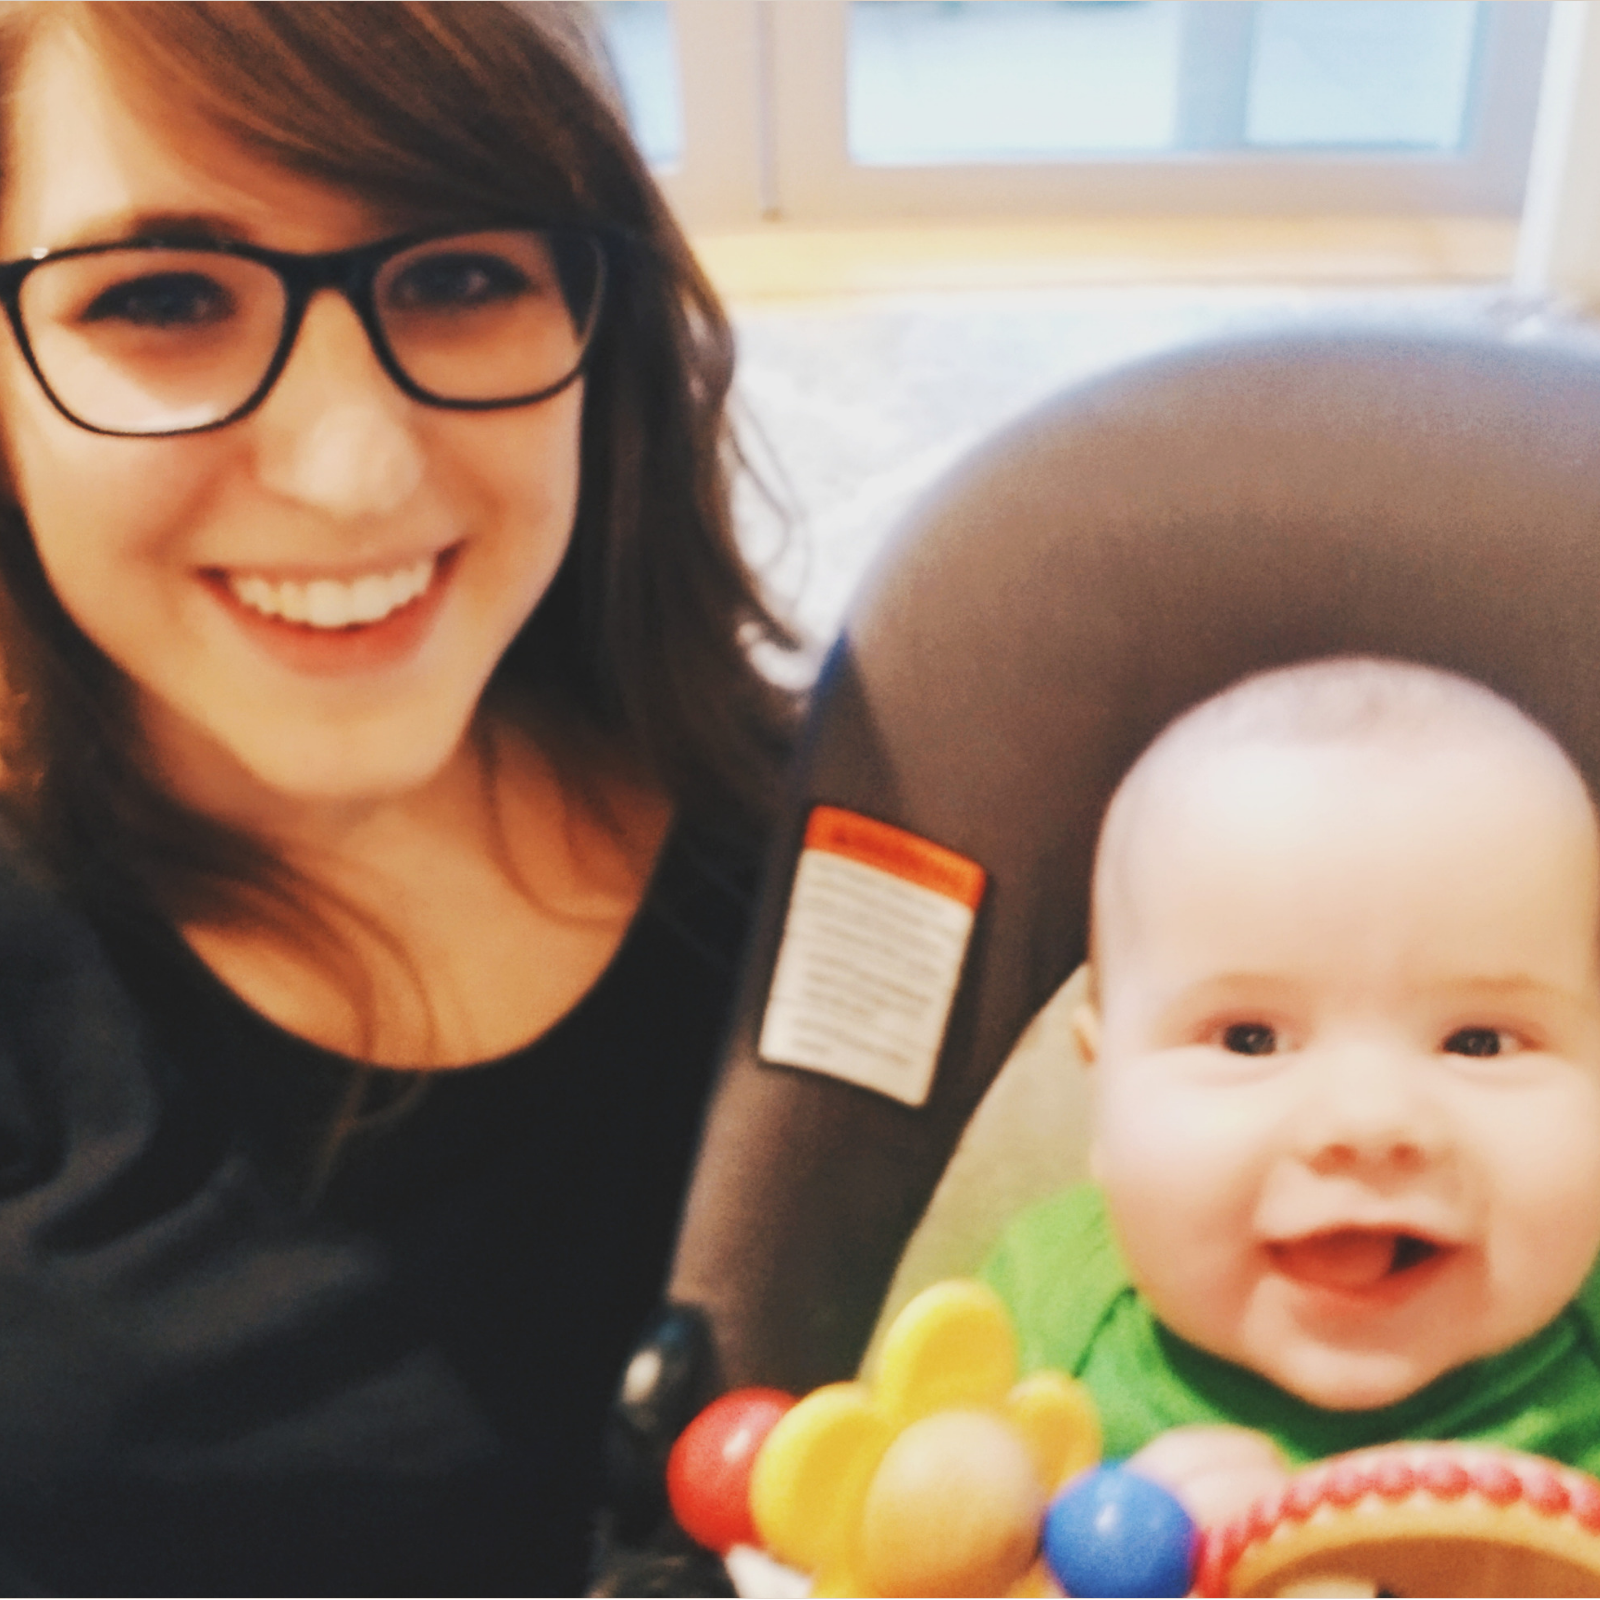 A girl wearing glasses, smiling next to a smiling baby